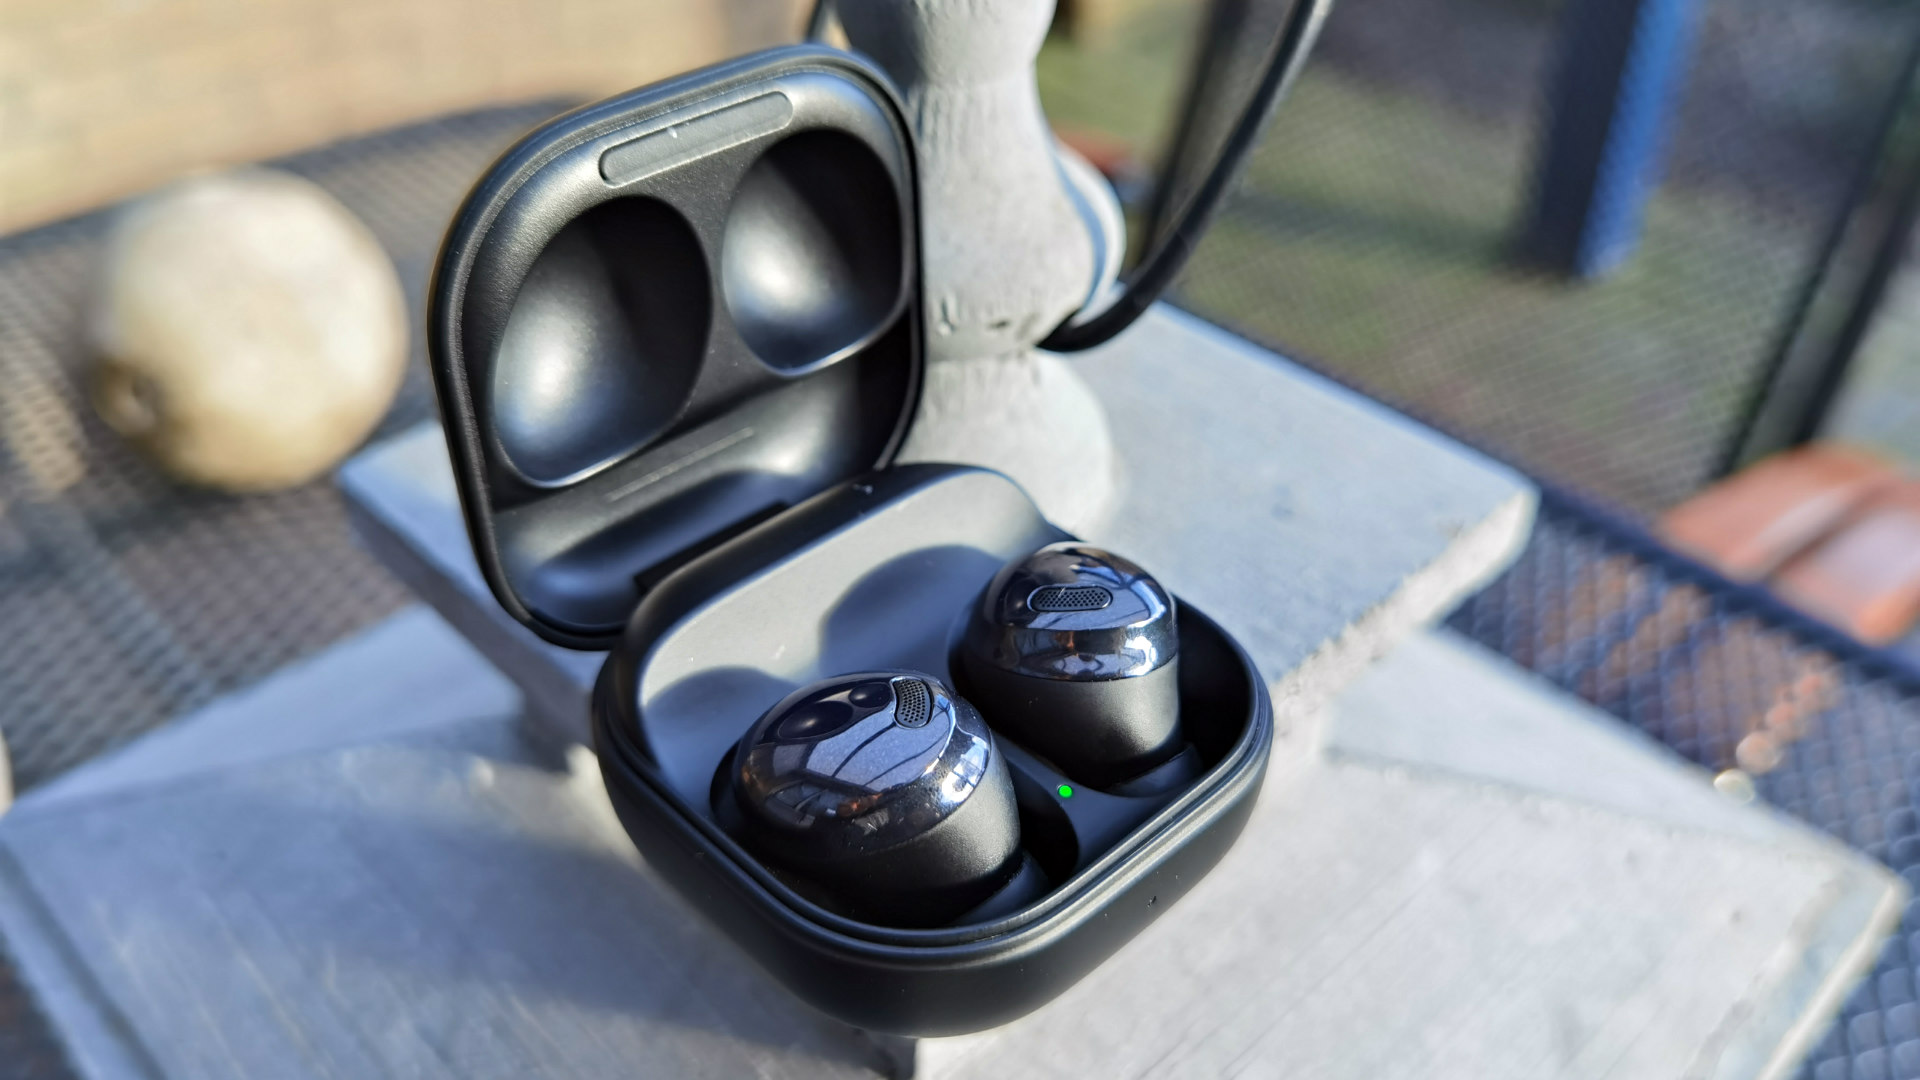 Samsung Galaxy Buds Pro review: great for Samsung phones, good ANC 